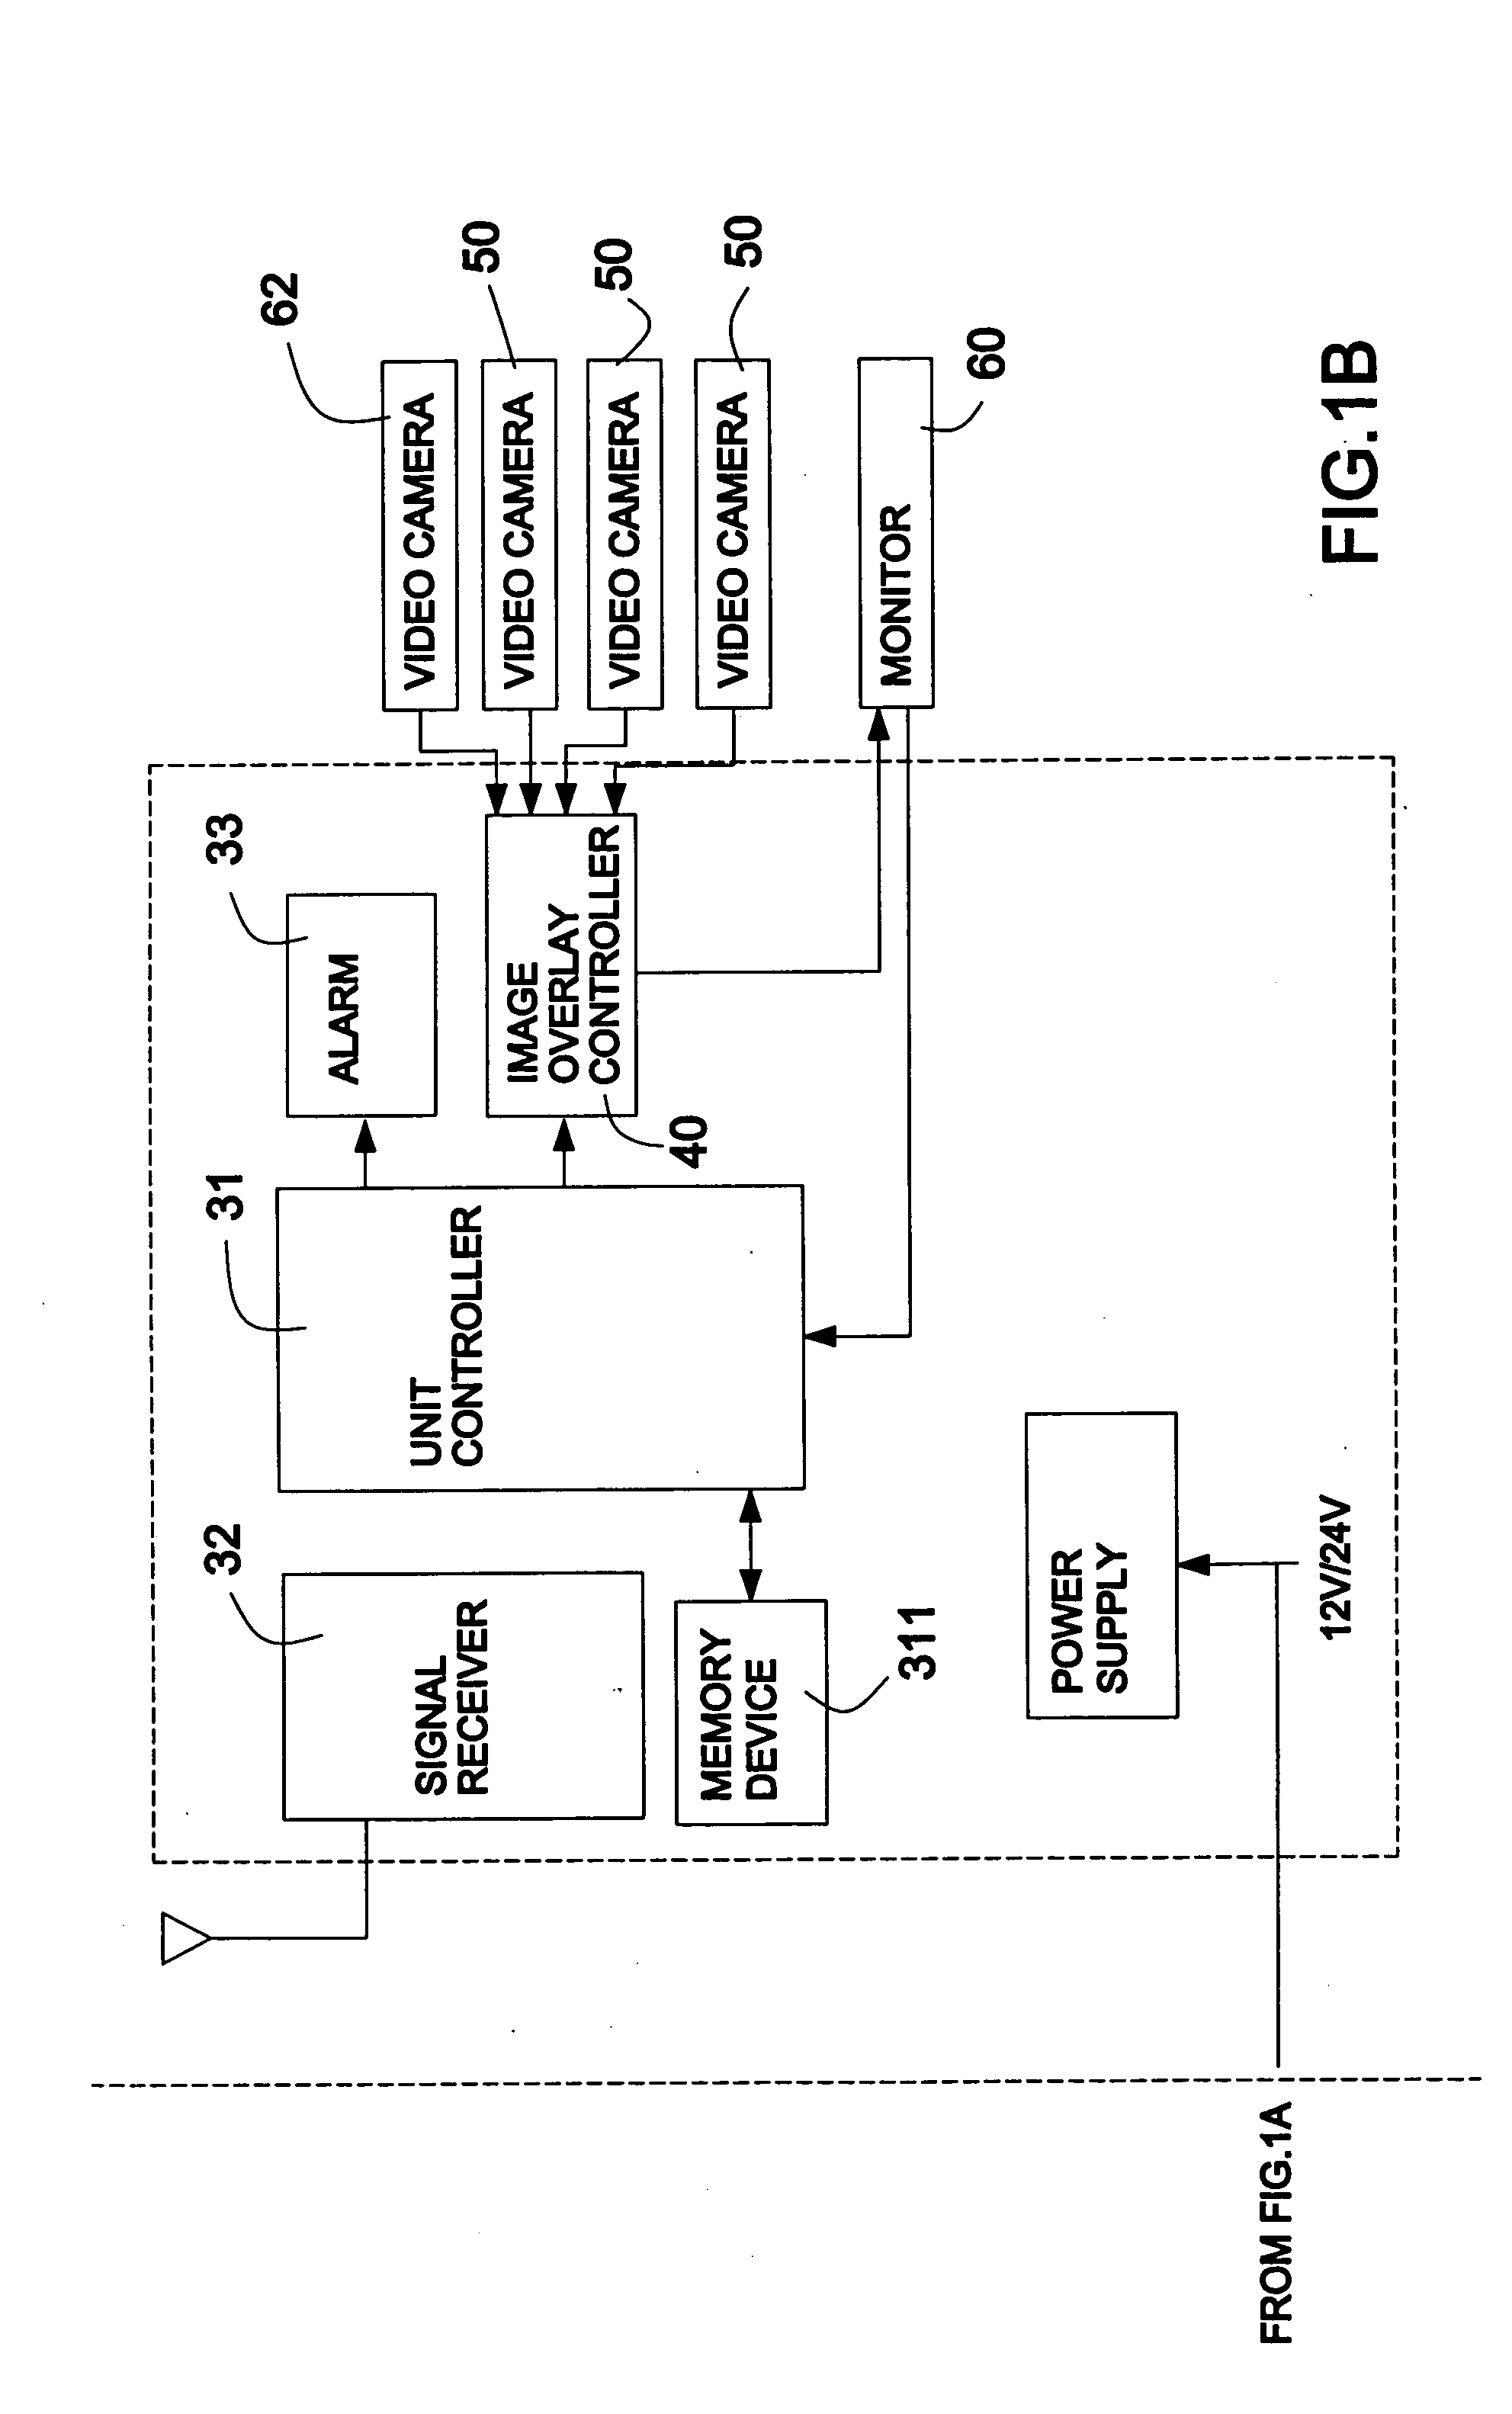 Vehicular monitoring systems with a multi-window display